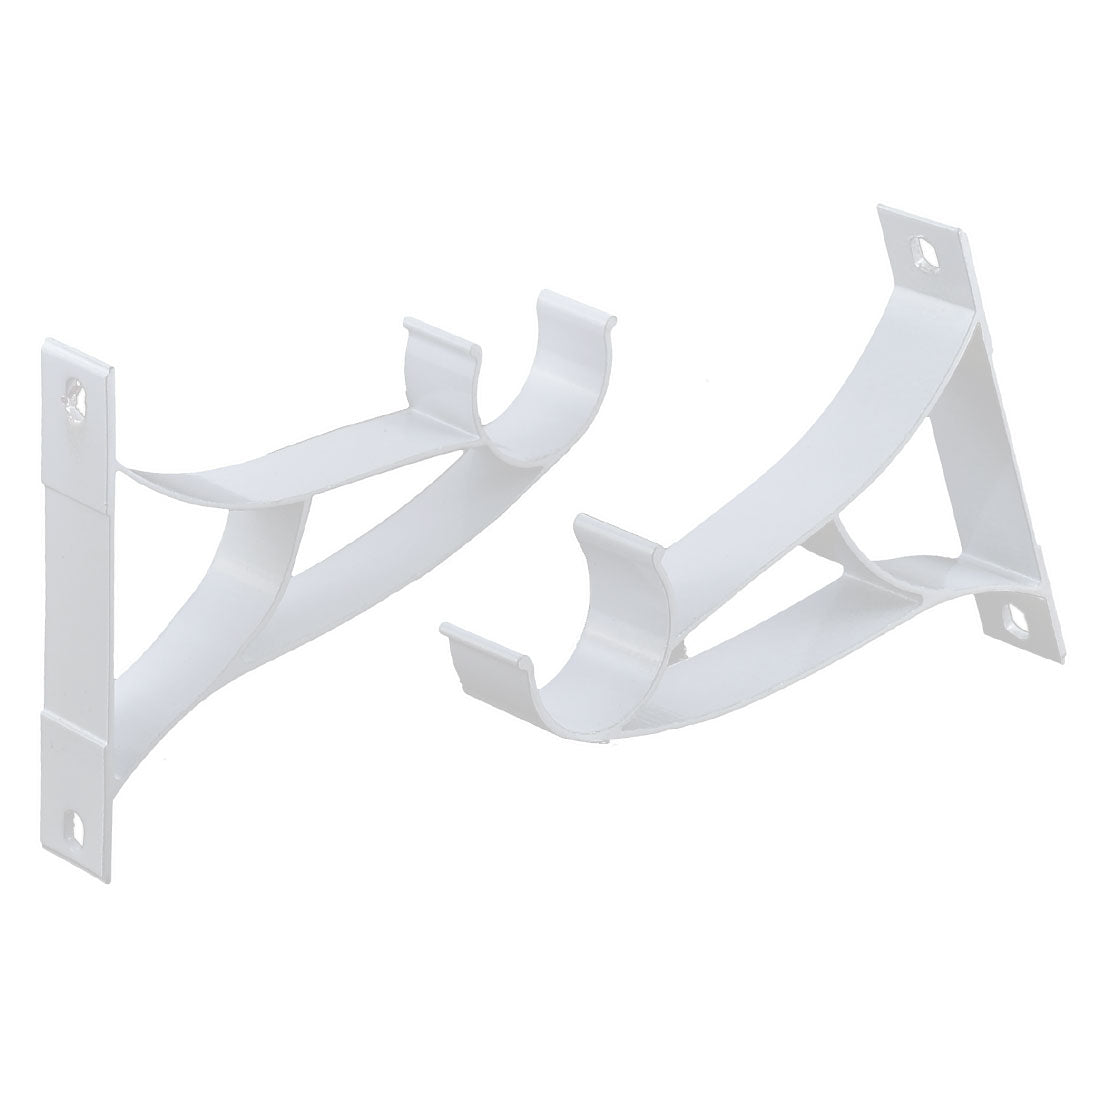 uxcell Uxcell Drapery Curtain Wall mount Single Groove Rod Bracket White 24mm Dia 6pcs